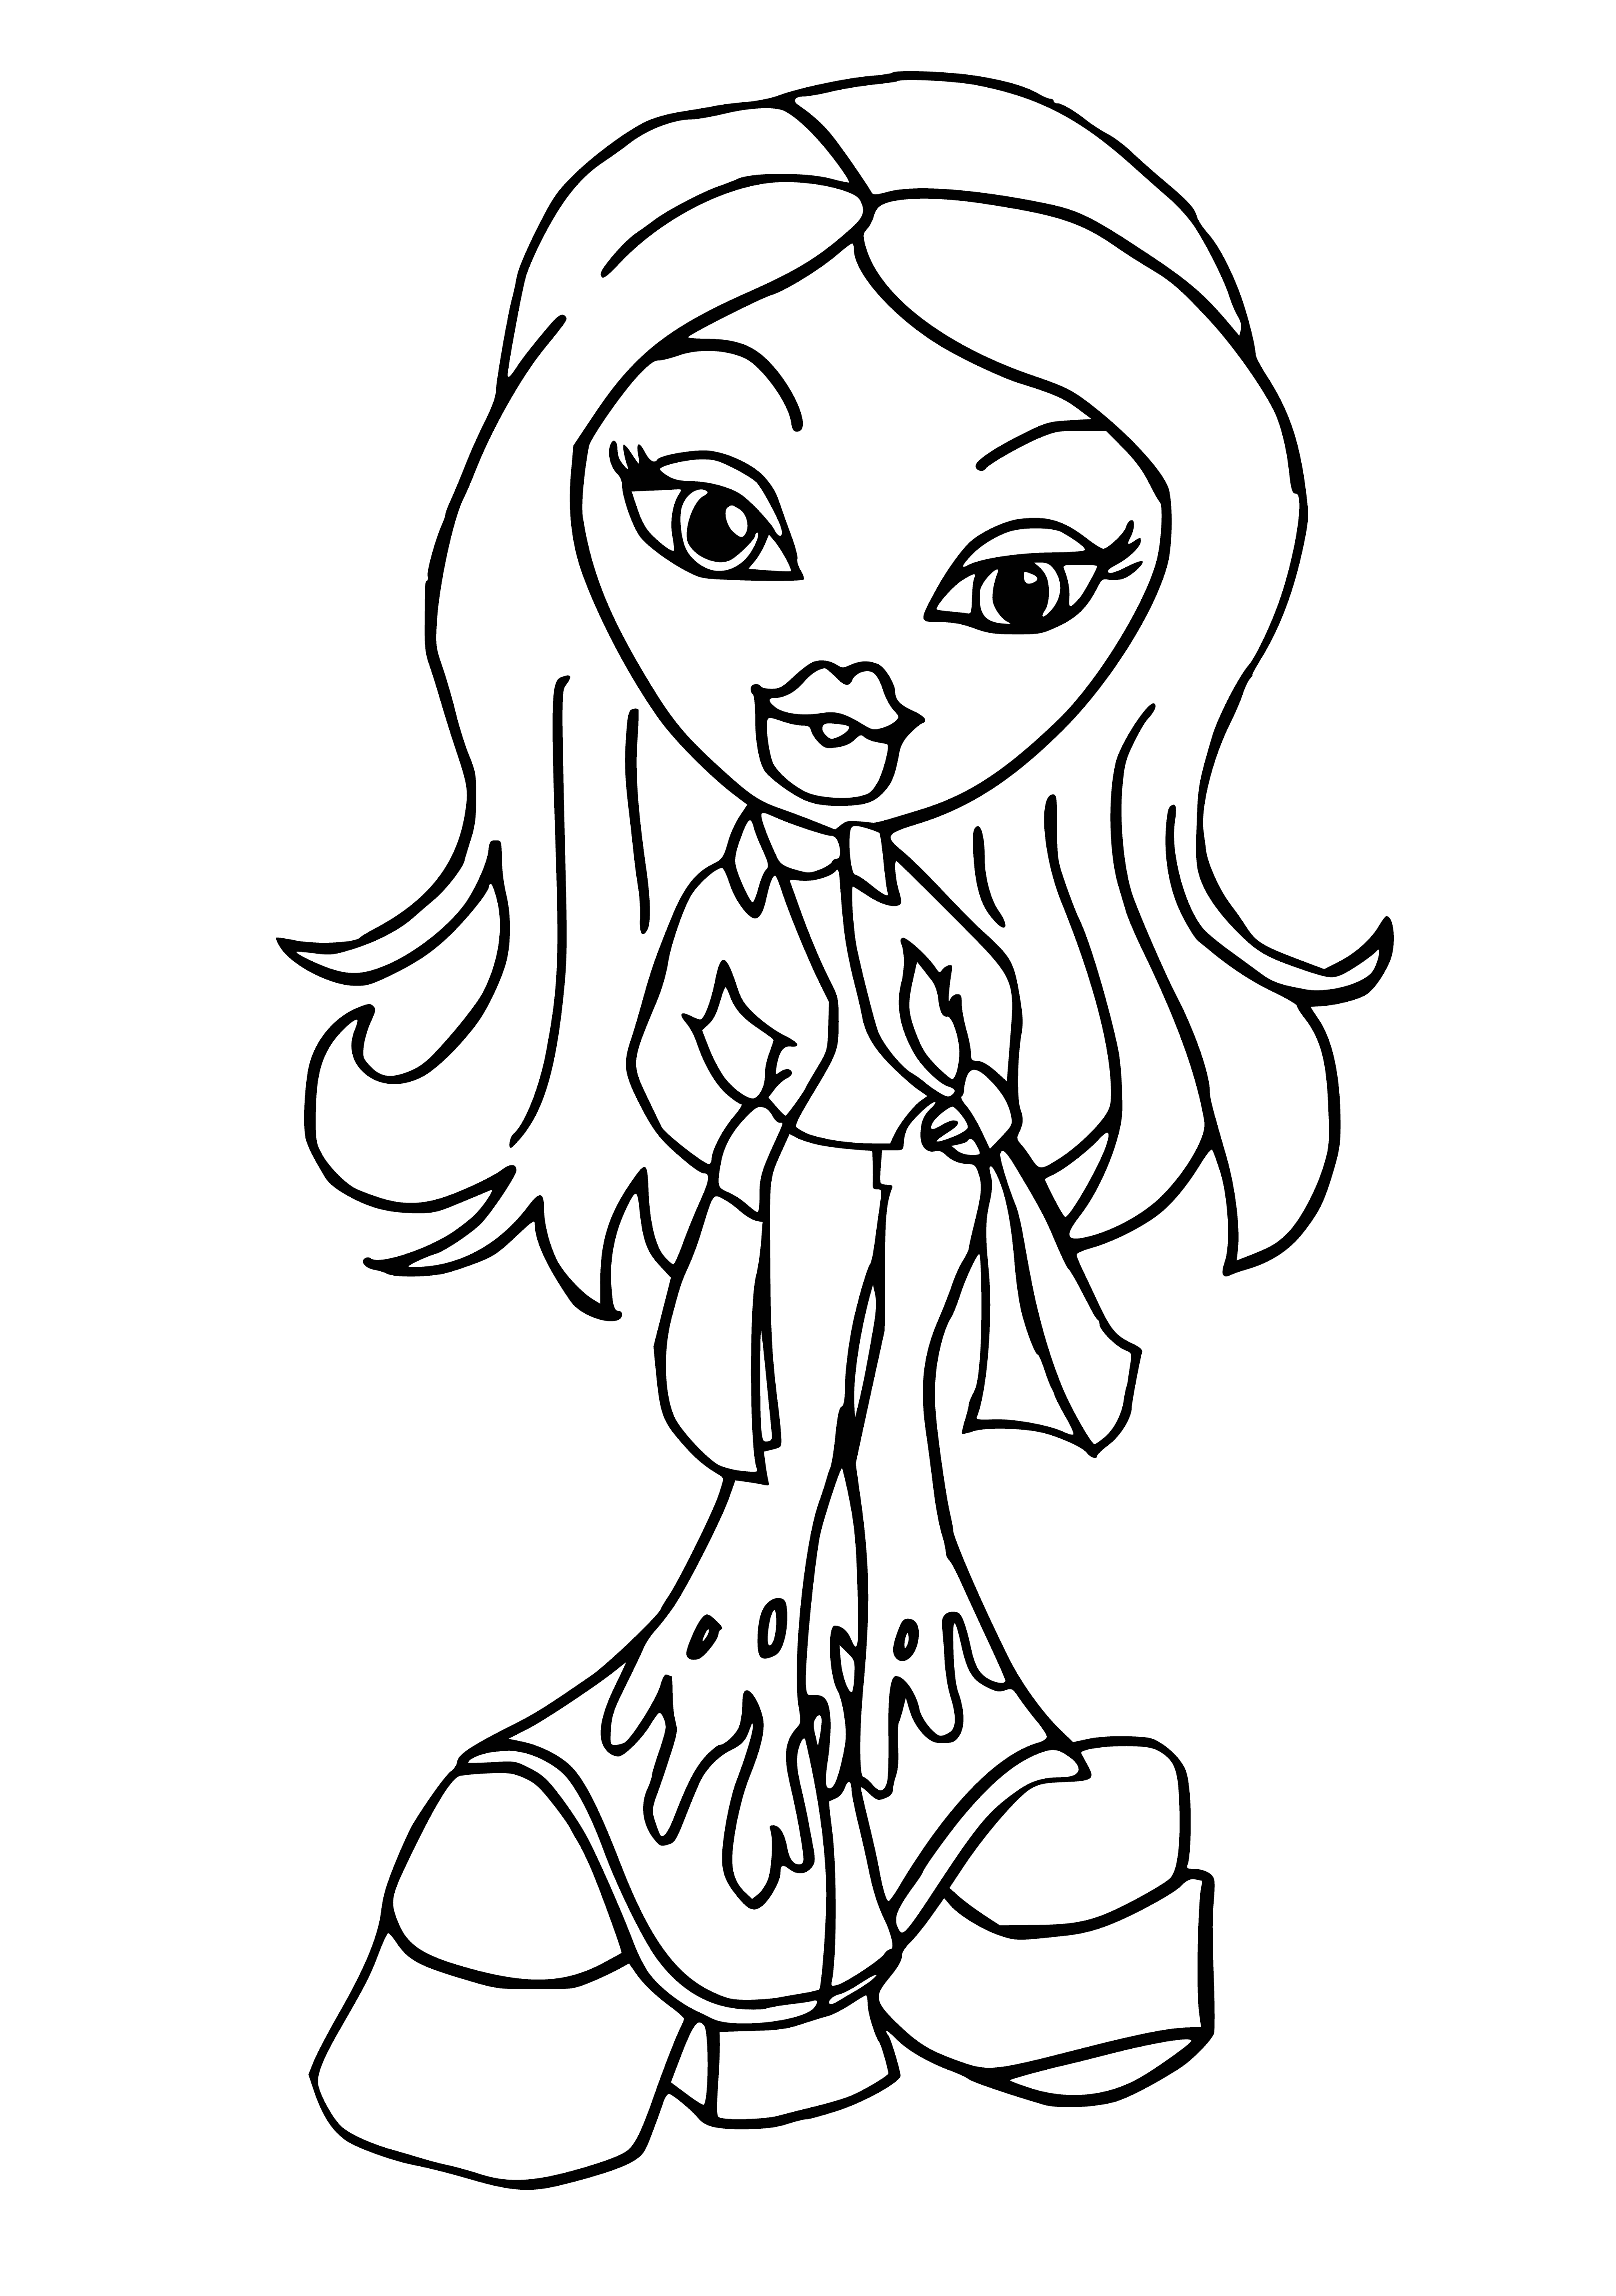 coloring page: Four Bratz dolls stand facing camera, holding hands. All have long hair, with three wearing makeup & two wearing earrings. Clothes in different colors.